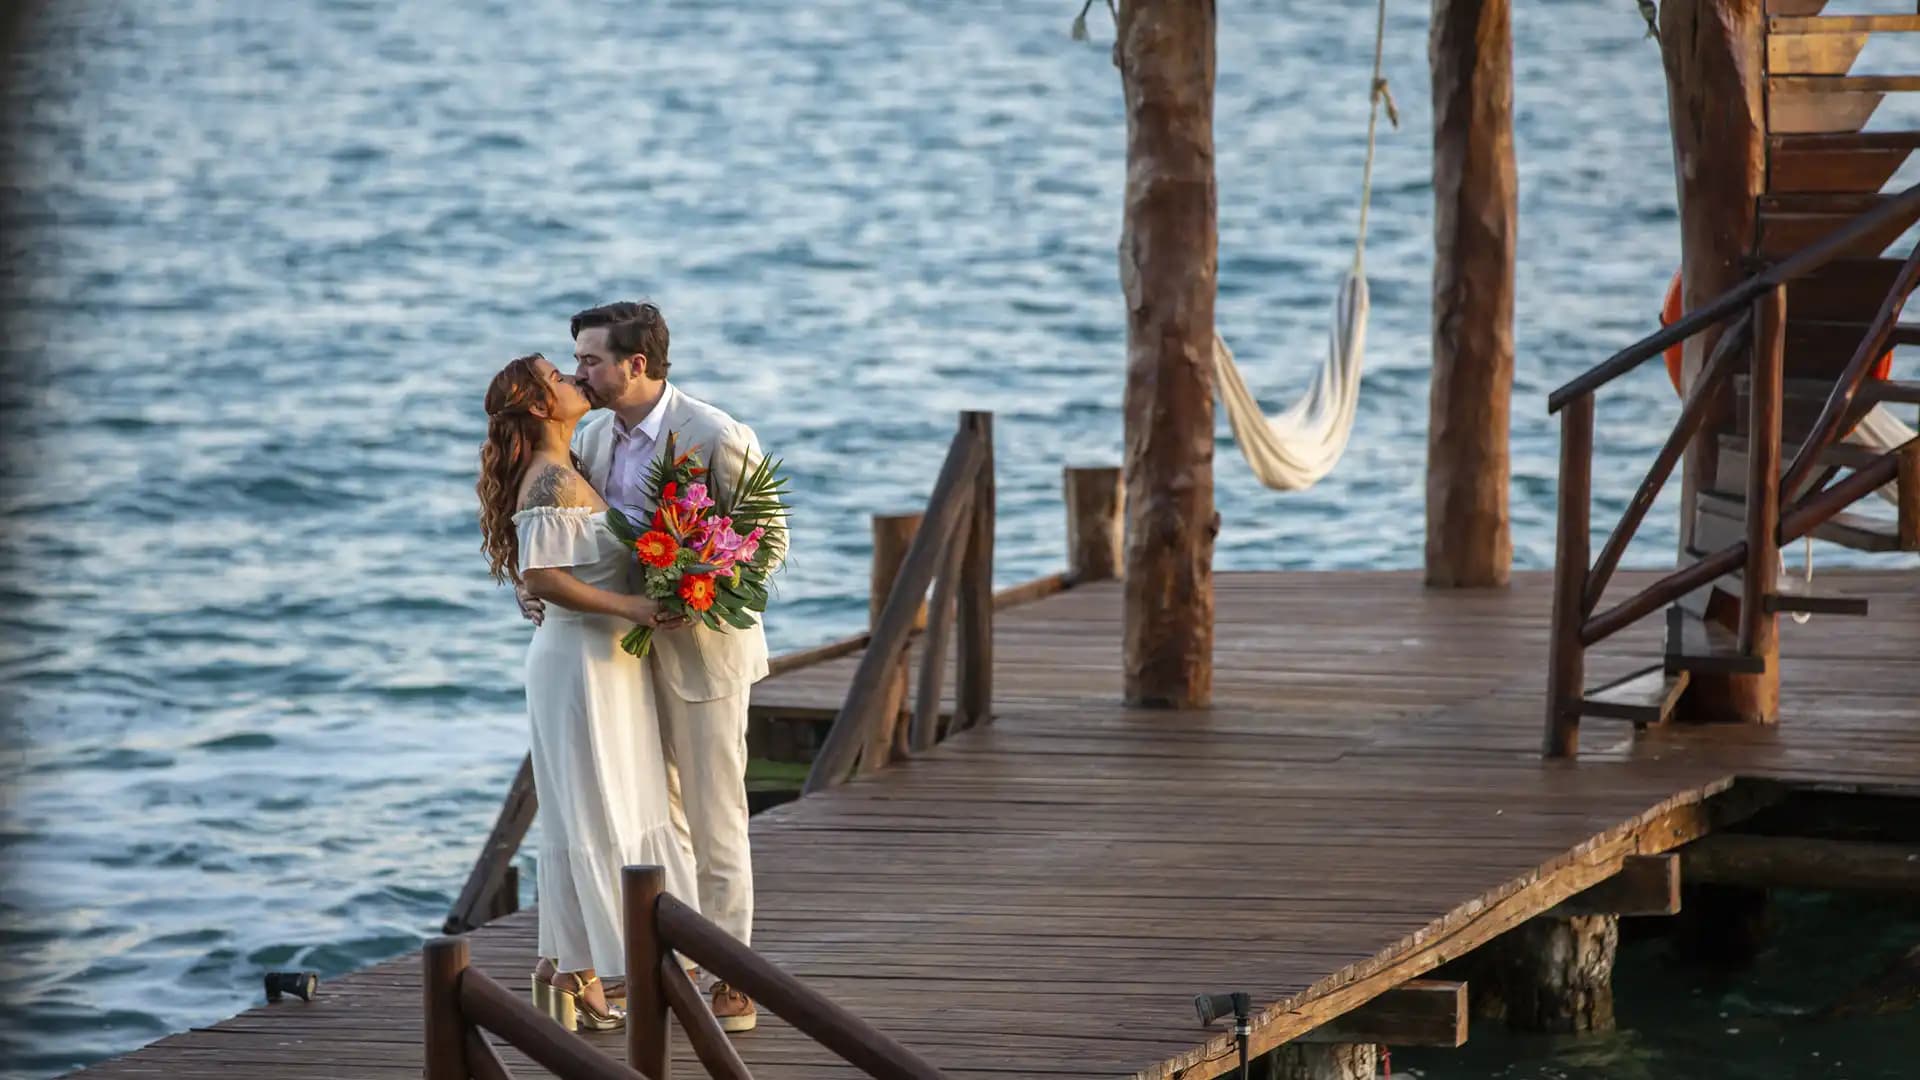 Bacalar: The Ideal Destination for a Luxury Wedding